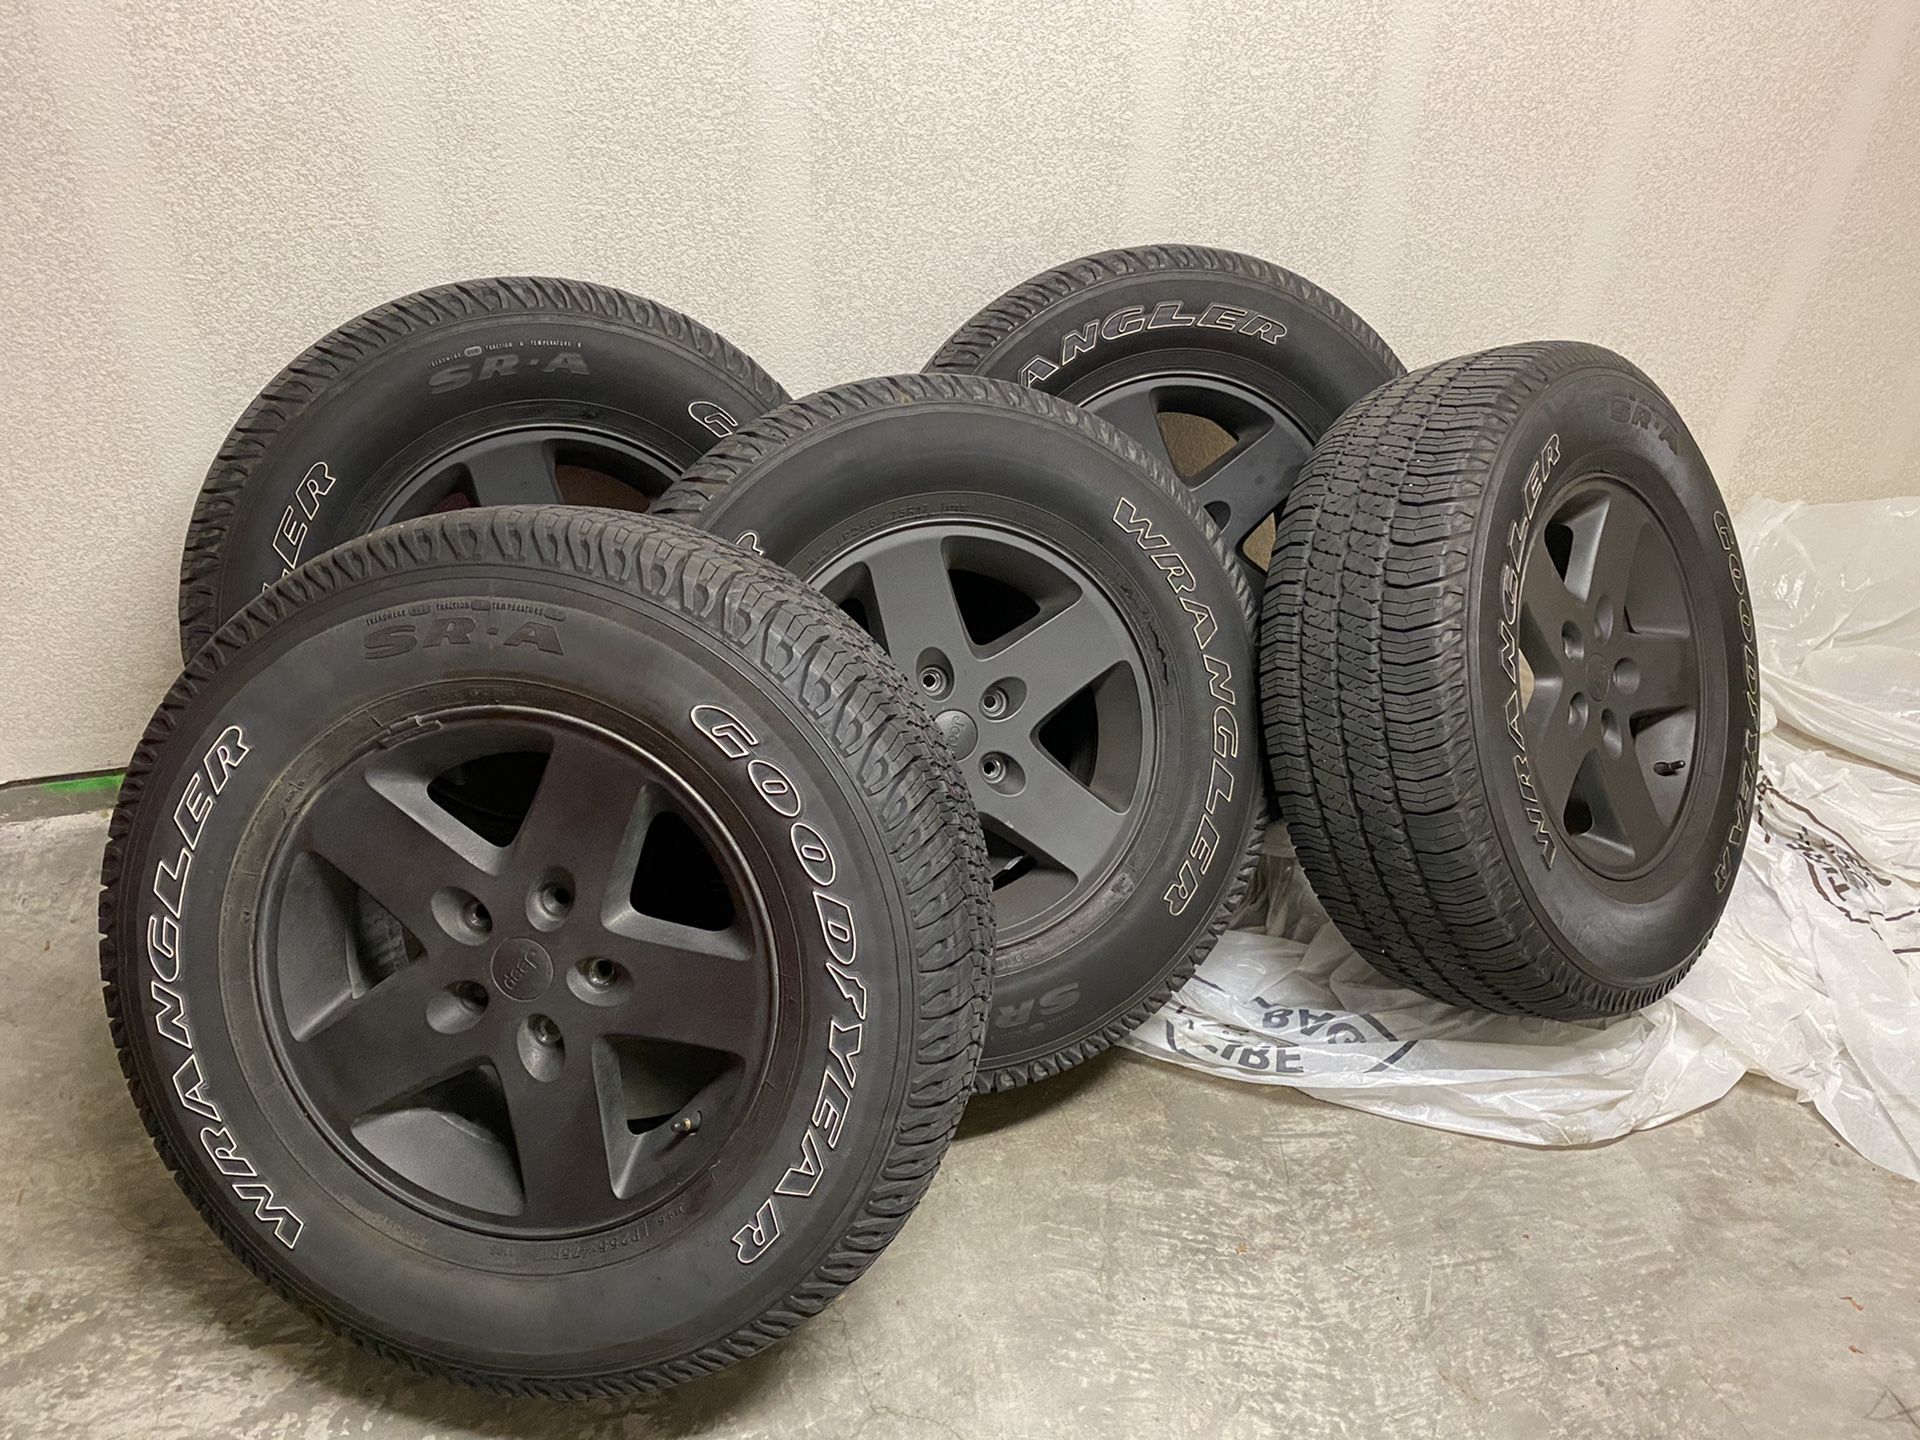 Wrangler wheels and tires